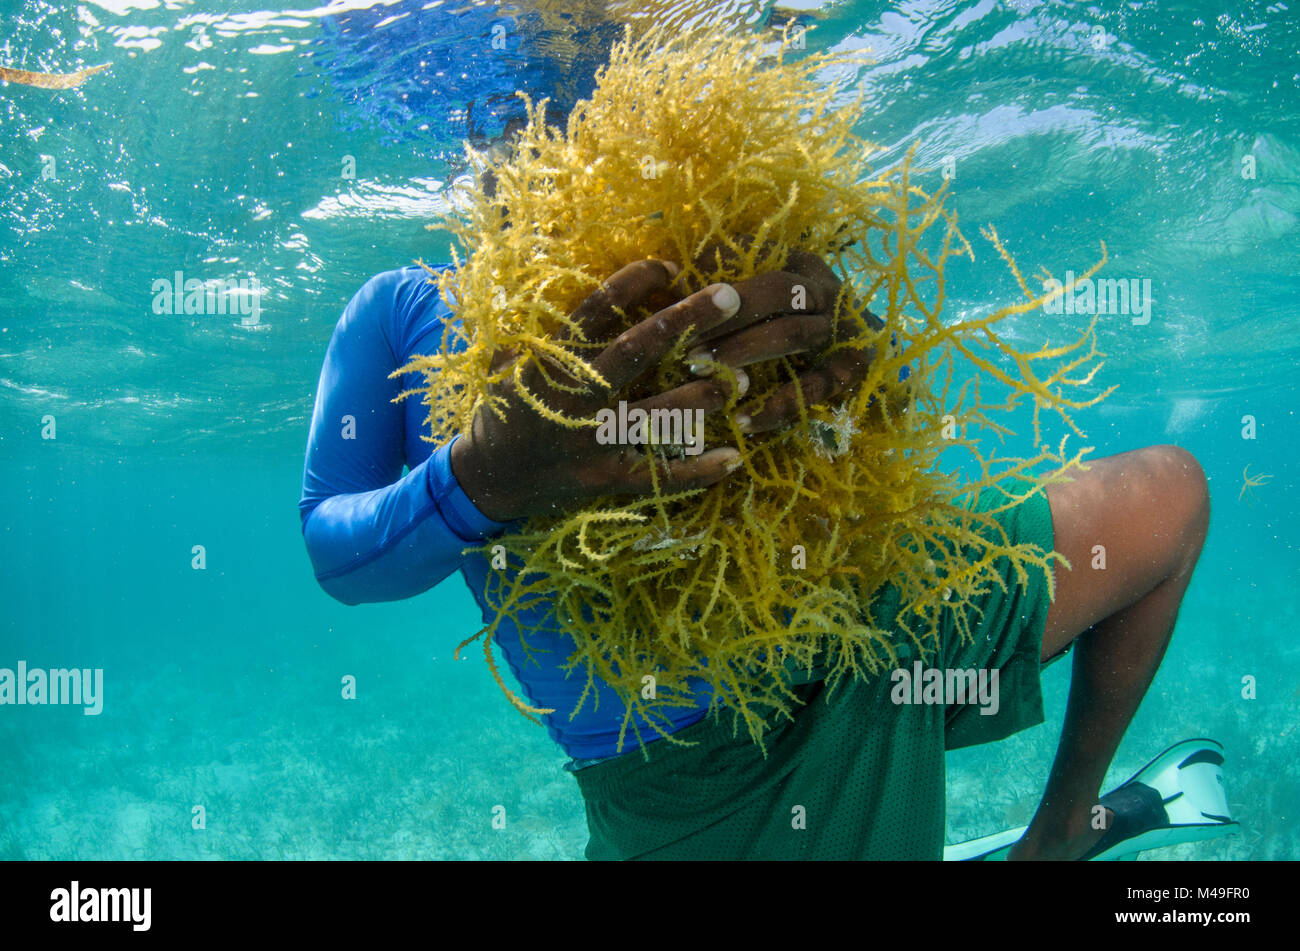 Diver collecting edible algae (Eucheuma sp.) Lighthouse Reef Atoll, Belize. May 2015. Model released. Stock Photo